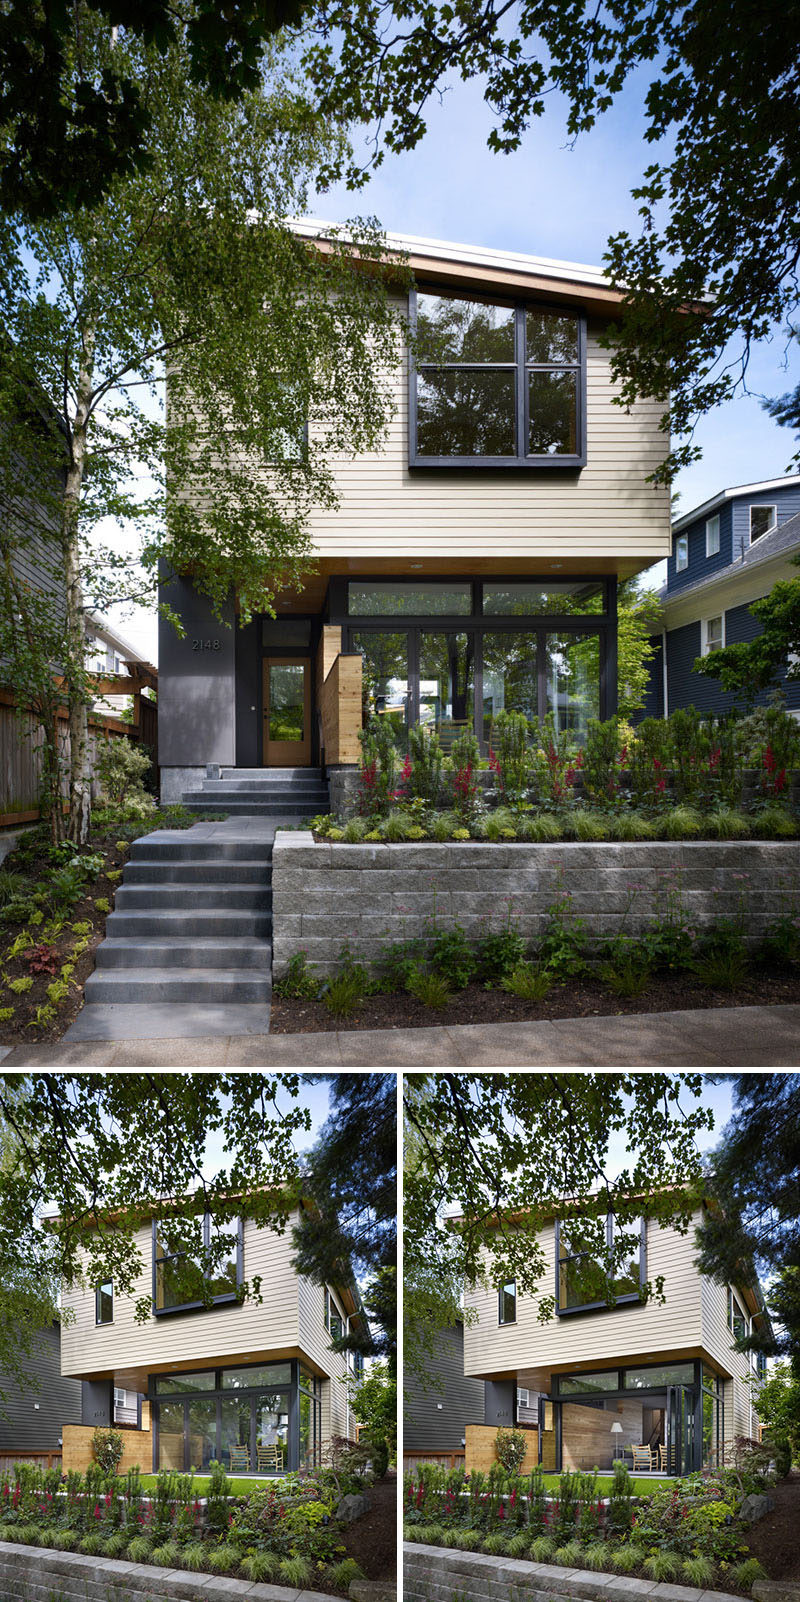 Principal architect Rik Adams, together with project team Rick Mohler and Rick Ghillino, designed this contemporary home located in Seattle's Queen Anne neighborhood, for a family that needed more space.